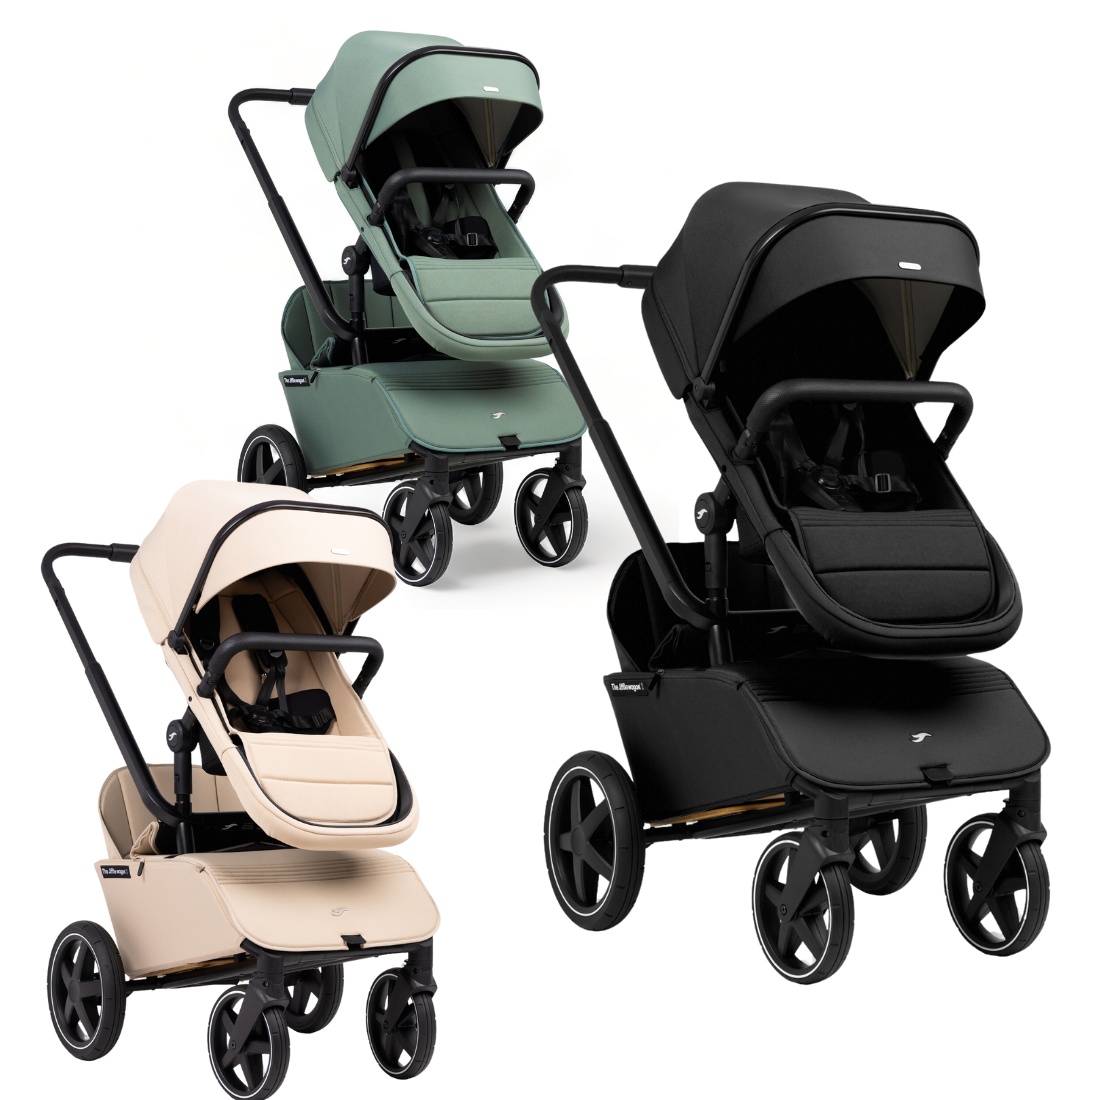 The Jiffle 2  DUO Stroller and wagon 6 in 1 combination